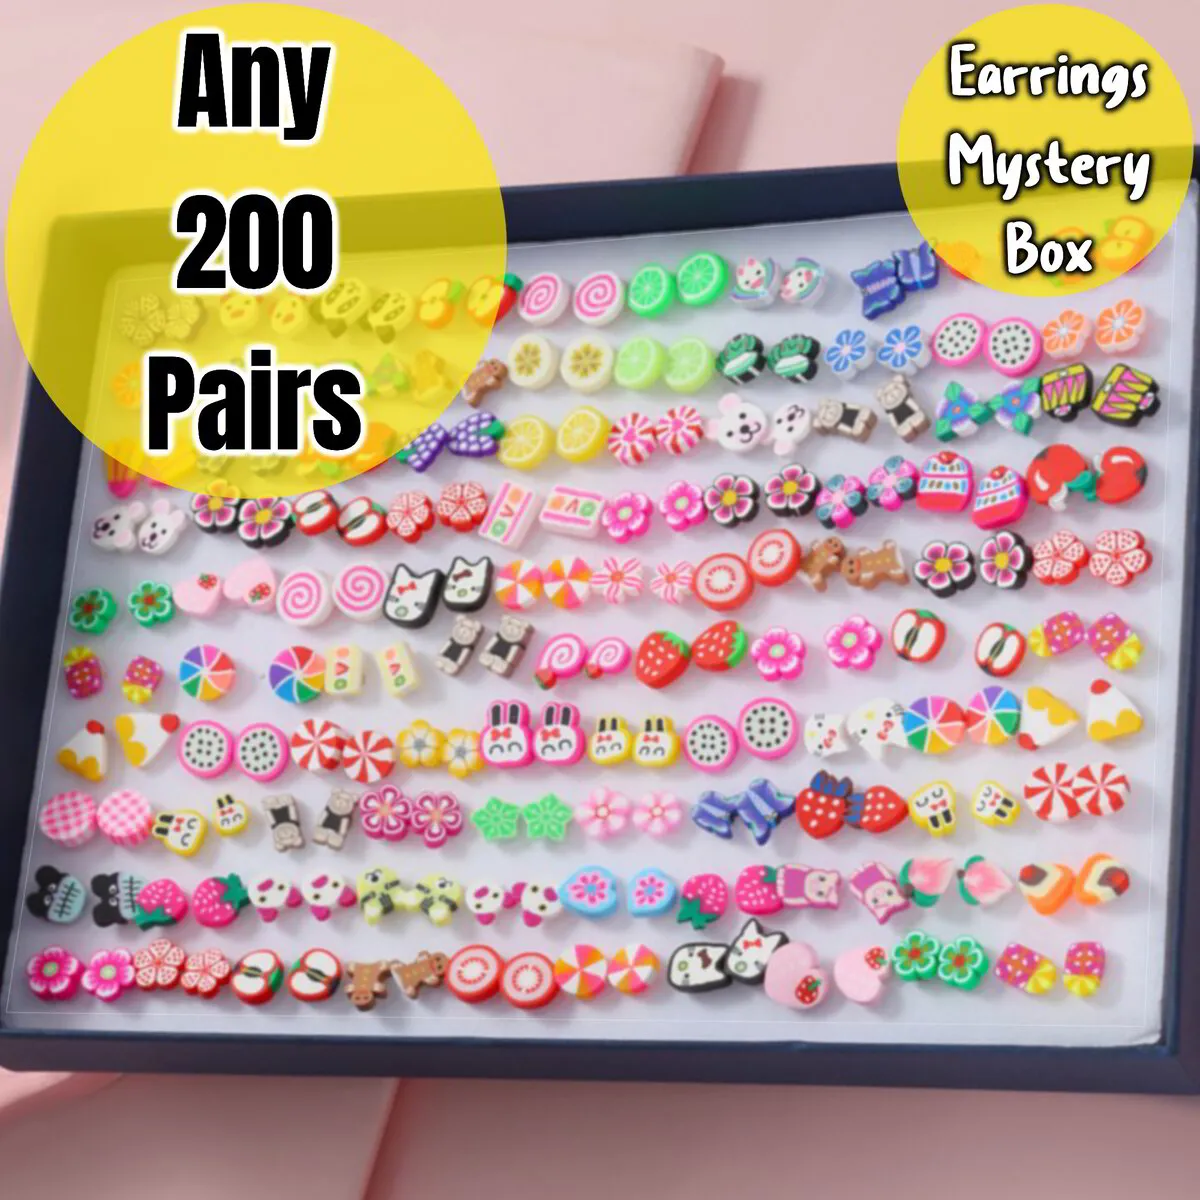 MYSTERY BOX 200 Pairs of Kids Earrings Ideal Gift for Girls